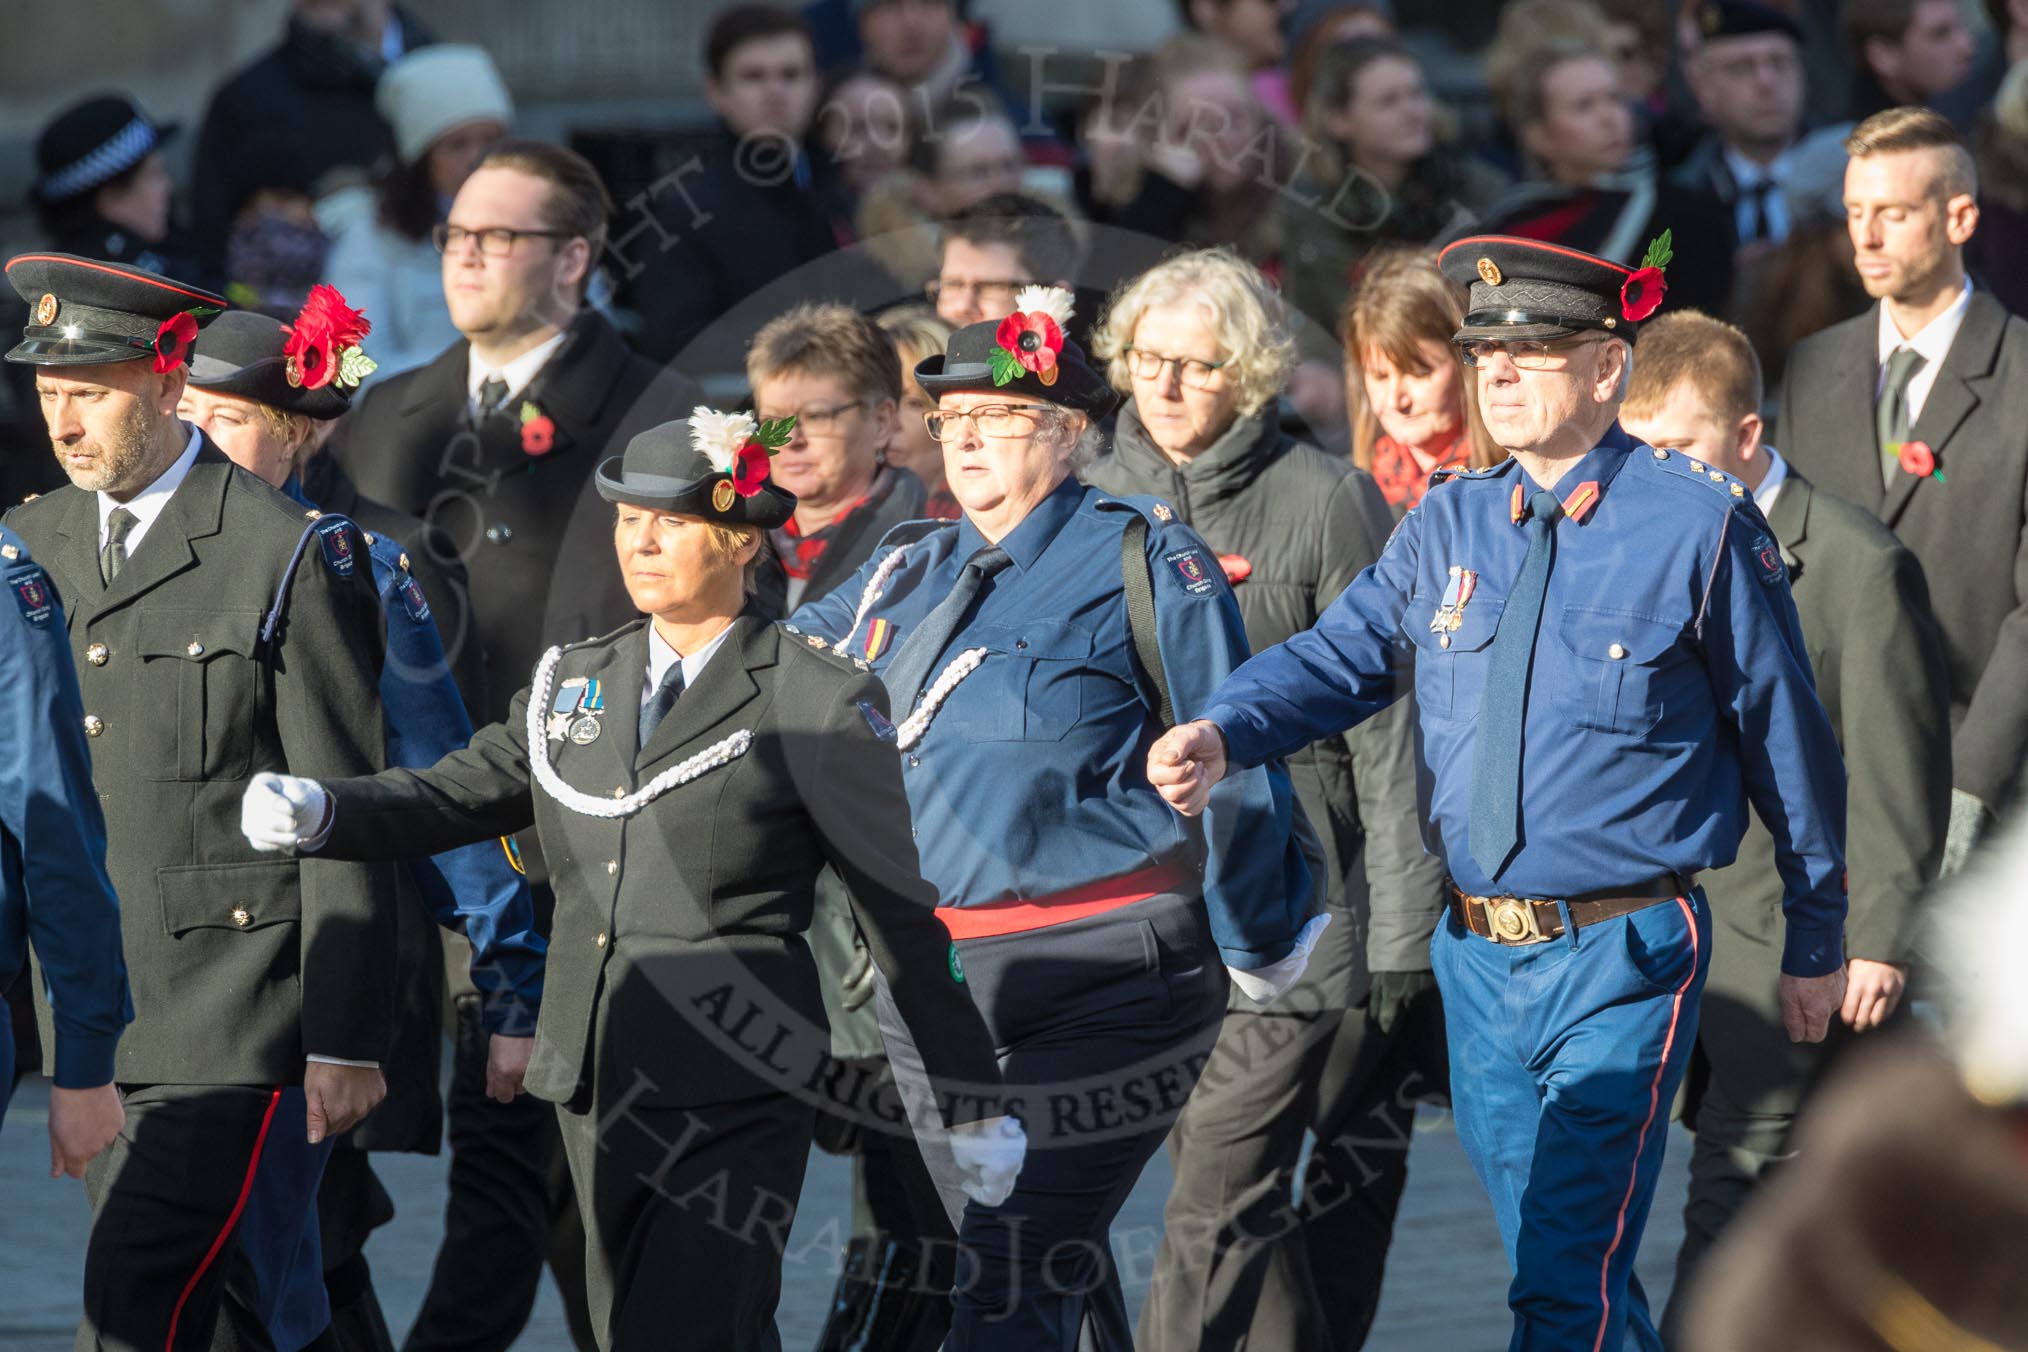 March Past, Remembrance Sunday at the Cenotaph 2016: M37 YMCA.
Cenotaph, Whitehall, London SW1,
London,
Greater London,
United Kingdom,
on 13 November 2016 at 13:19, image #2903